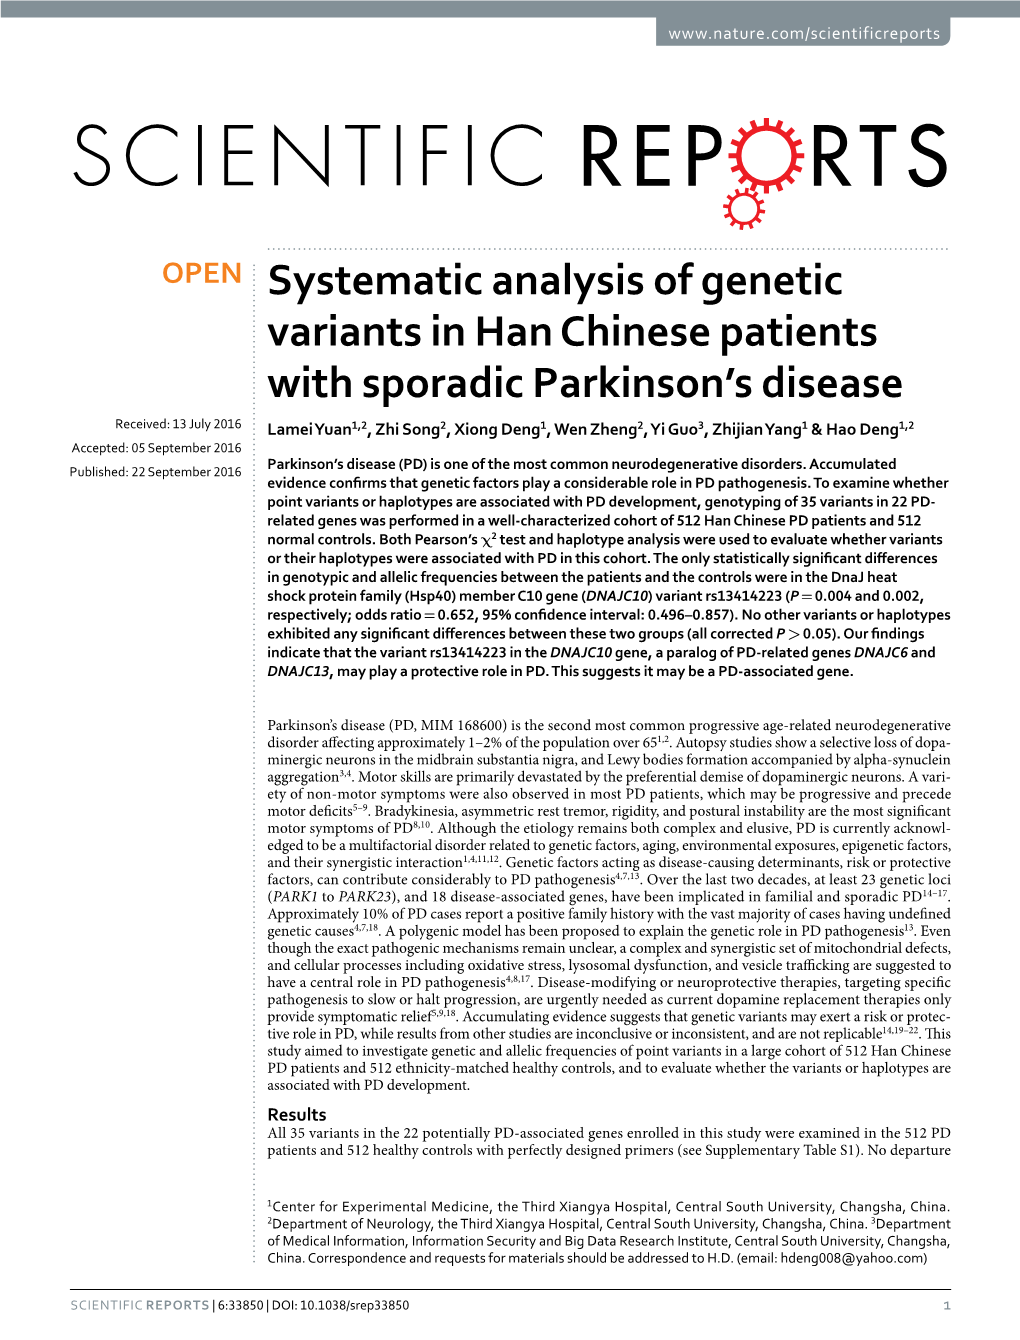 Systematic Analysis of Genetic Variants in Han Chinese Patients With